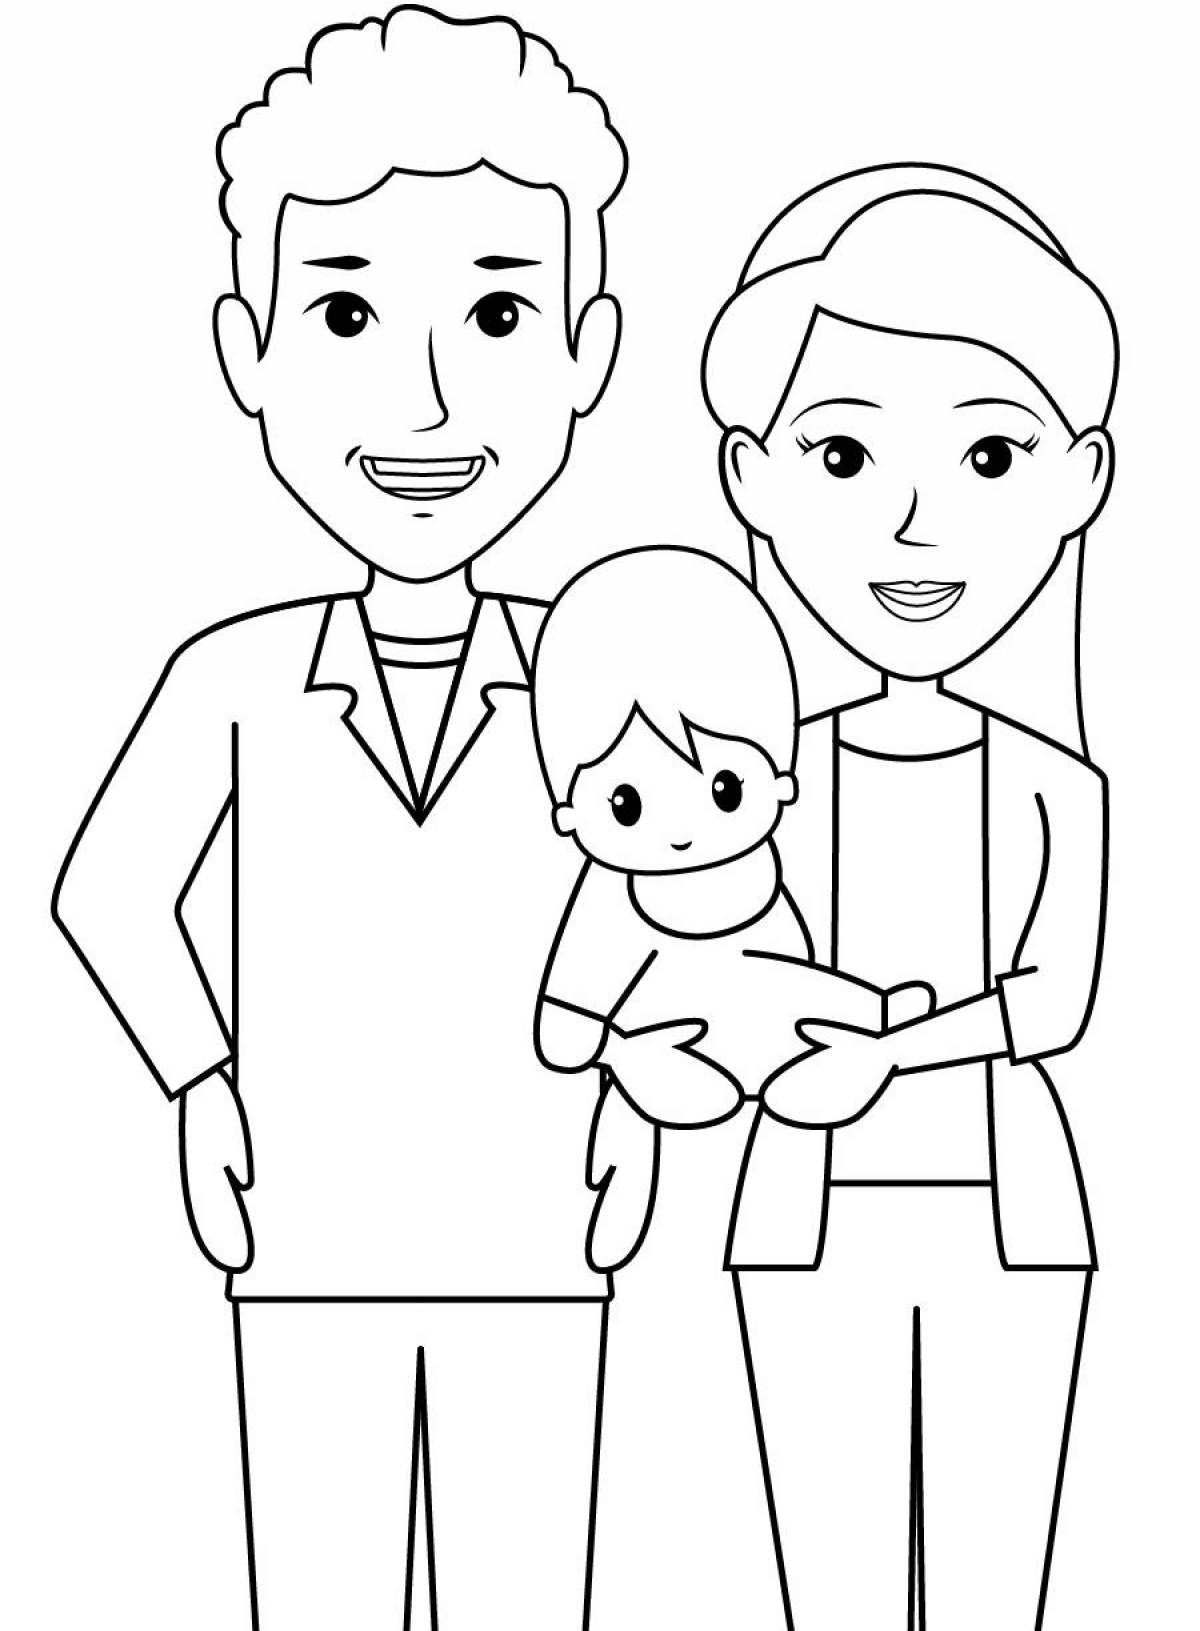 Intriguing spy family coloring book